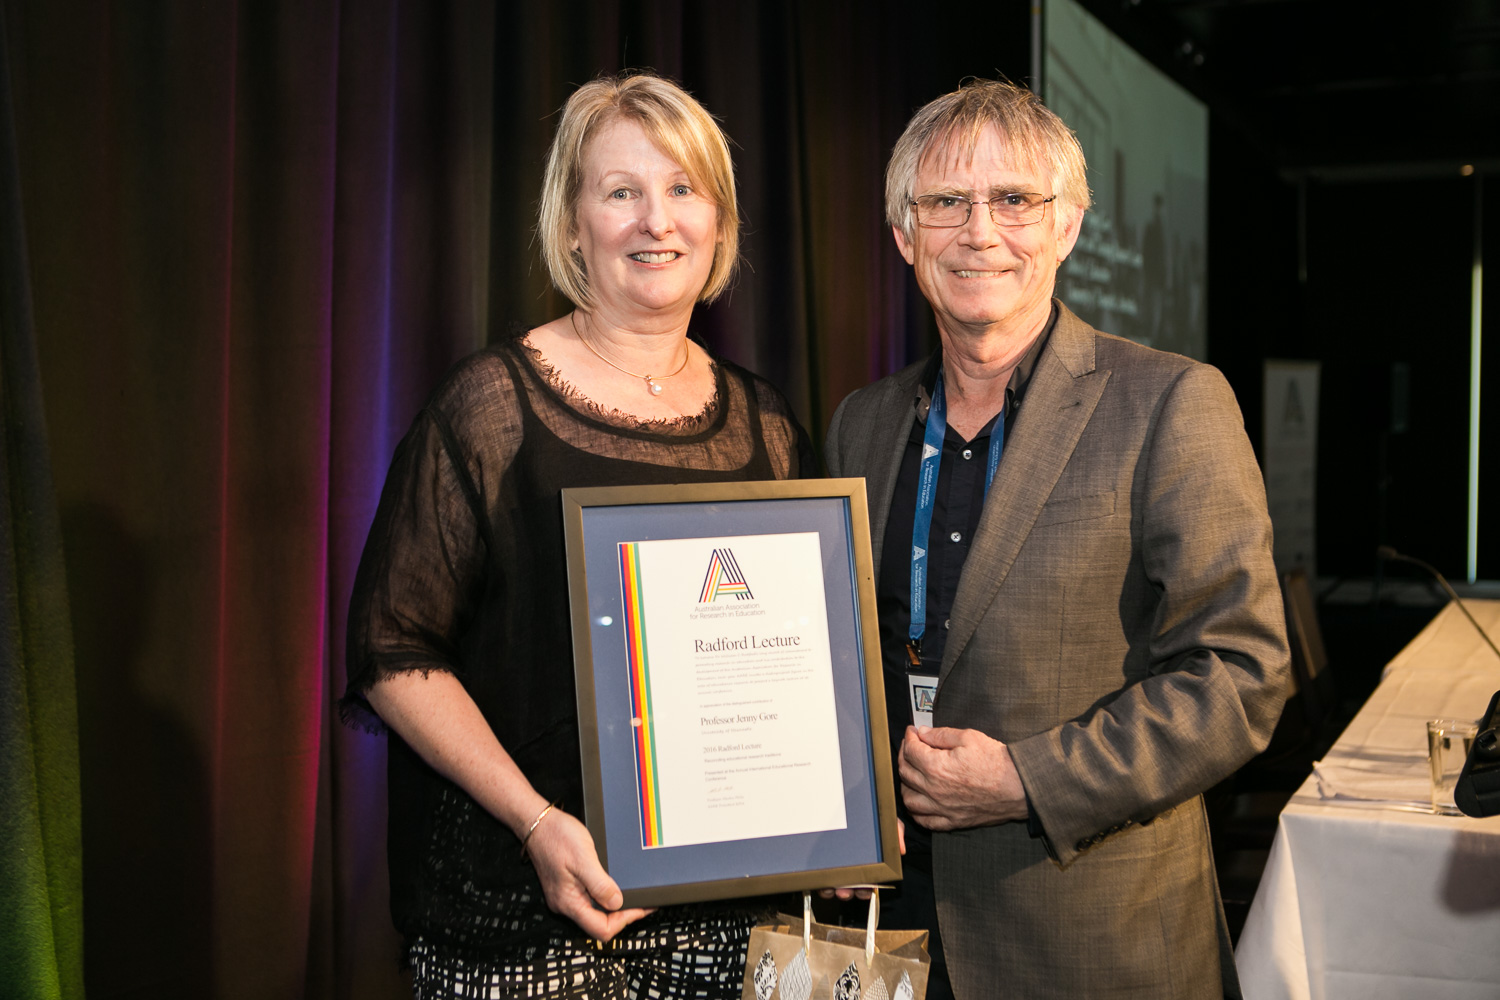 Accolades for UON Education at AARE conference